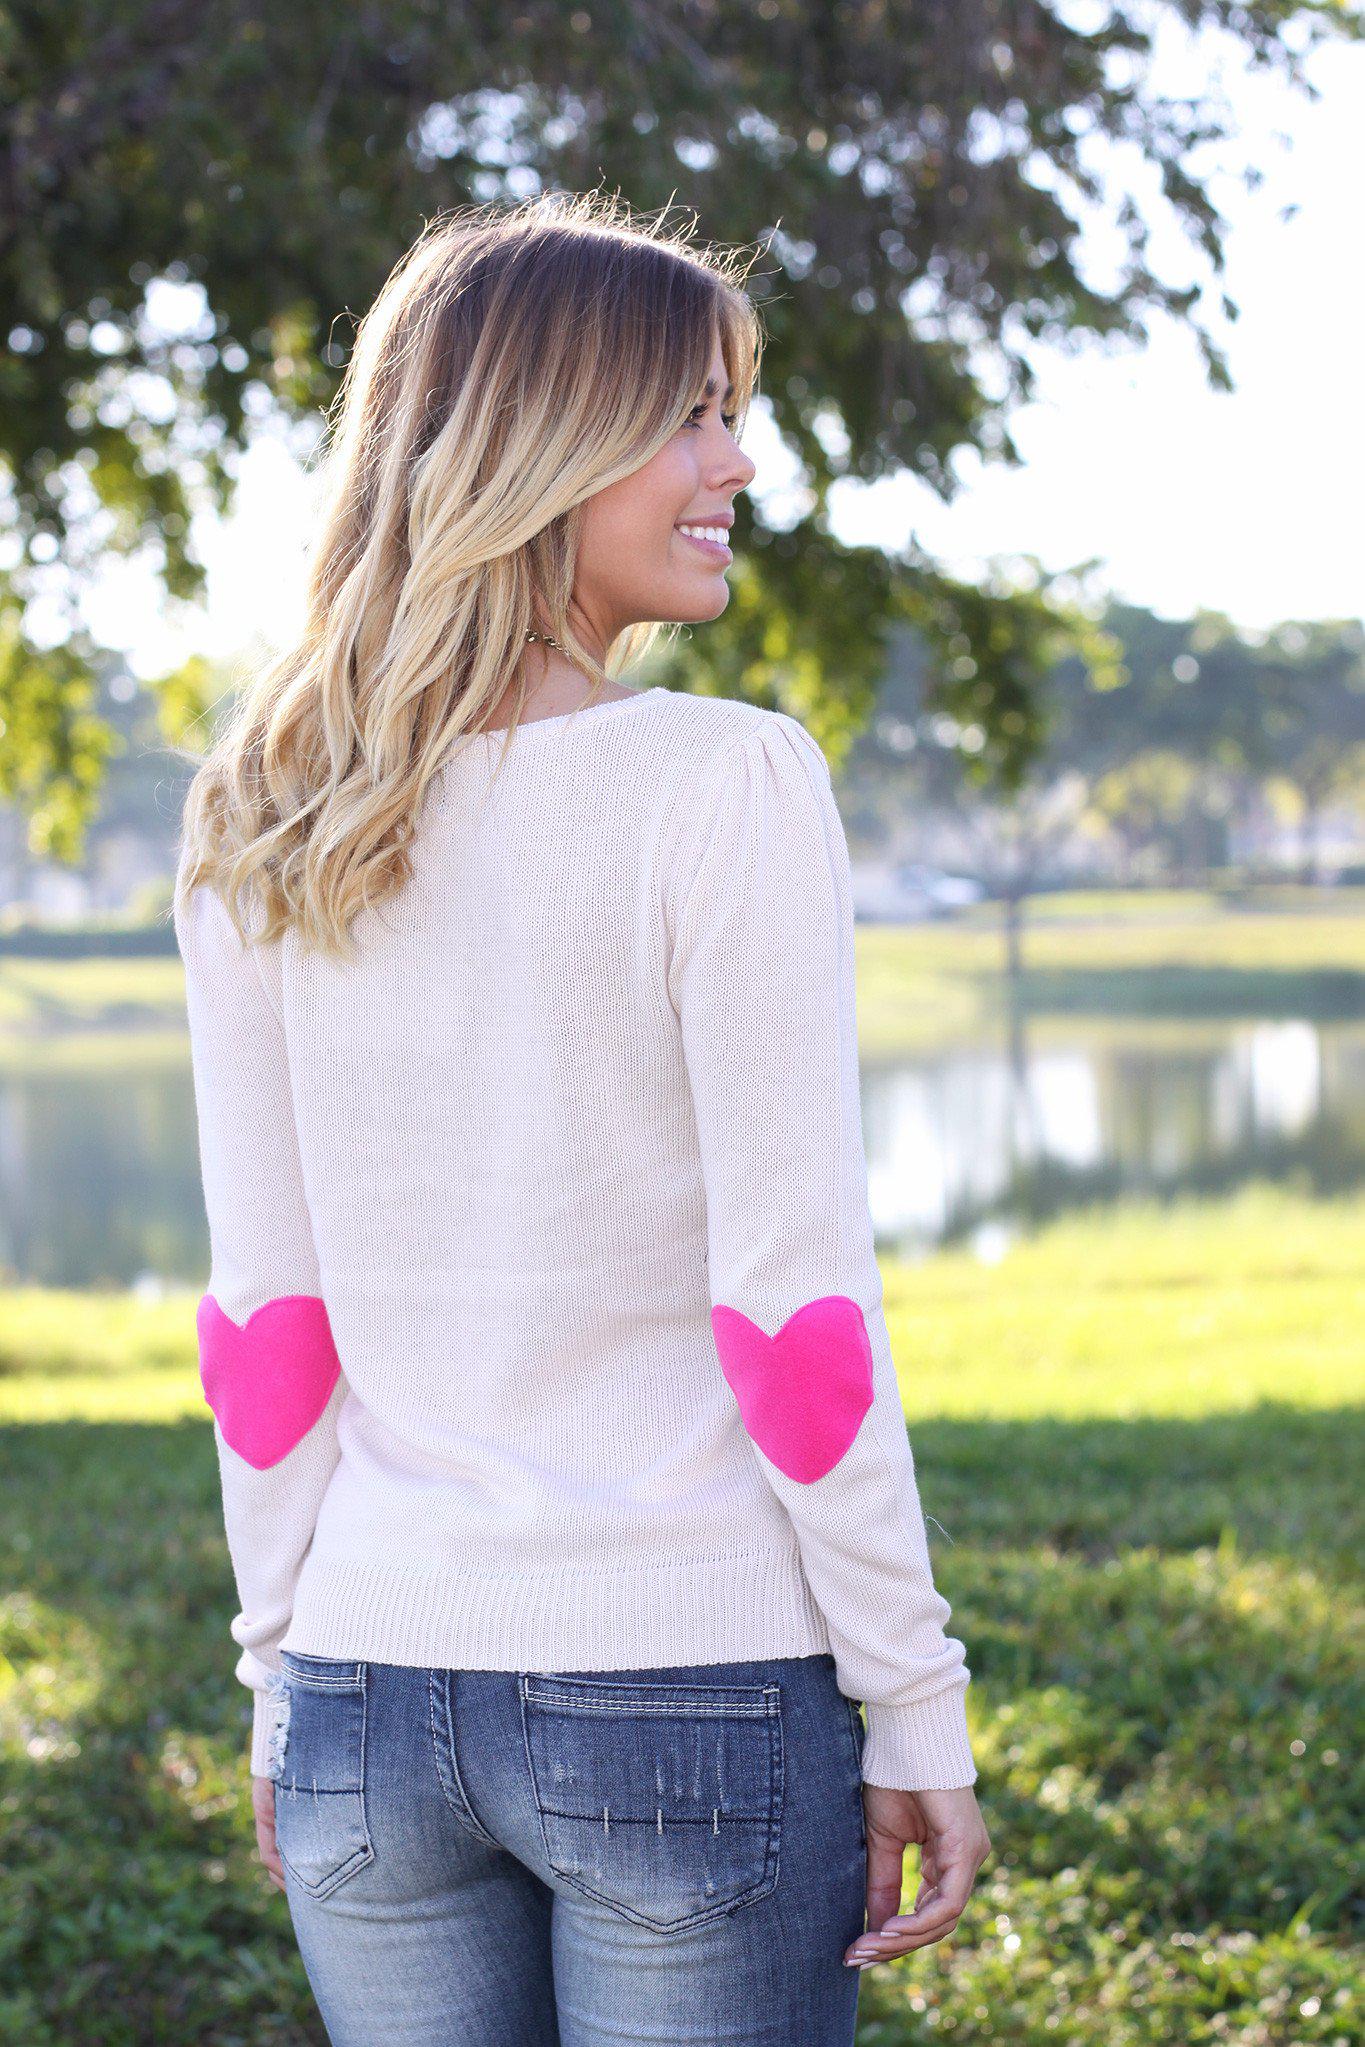 Cream Sweater With Heart Elbow Patches – Saved by the Dress